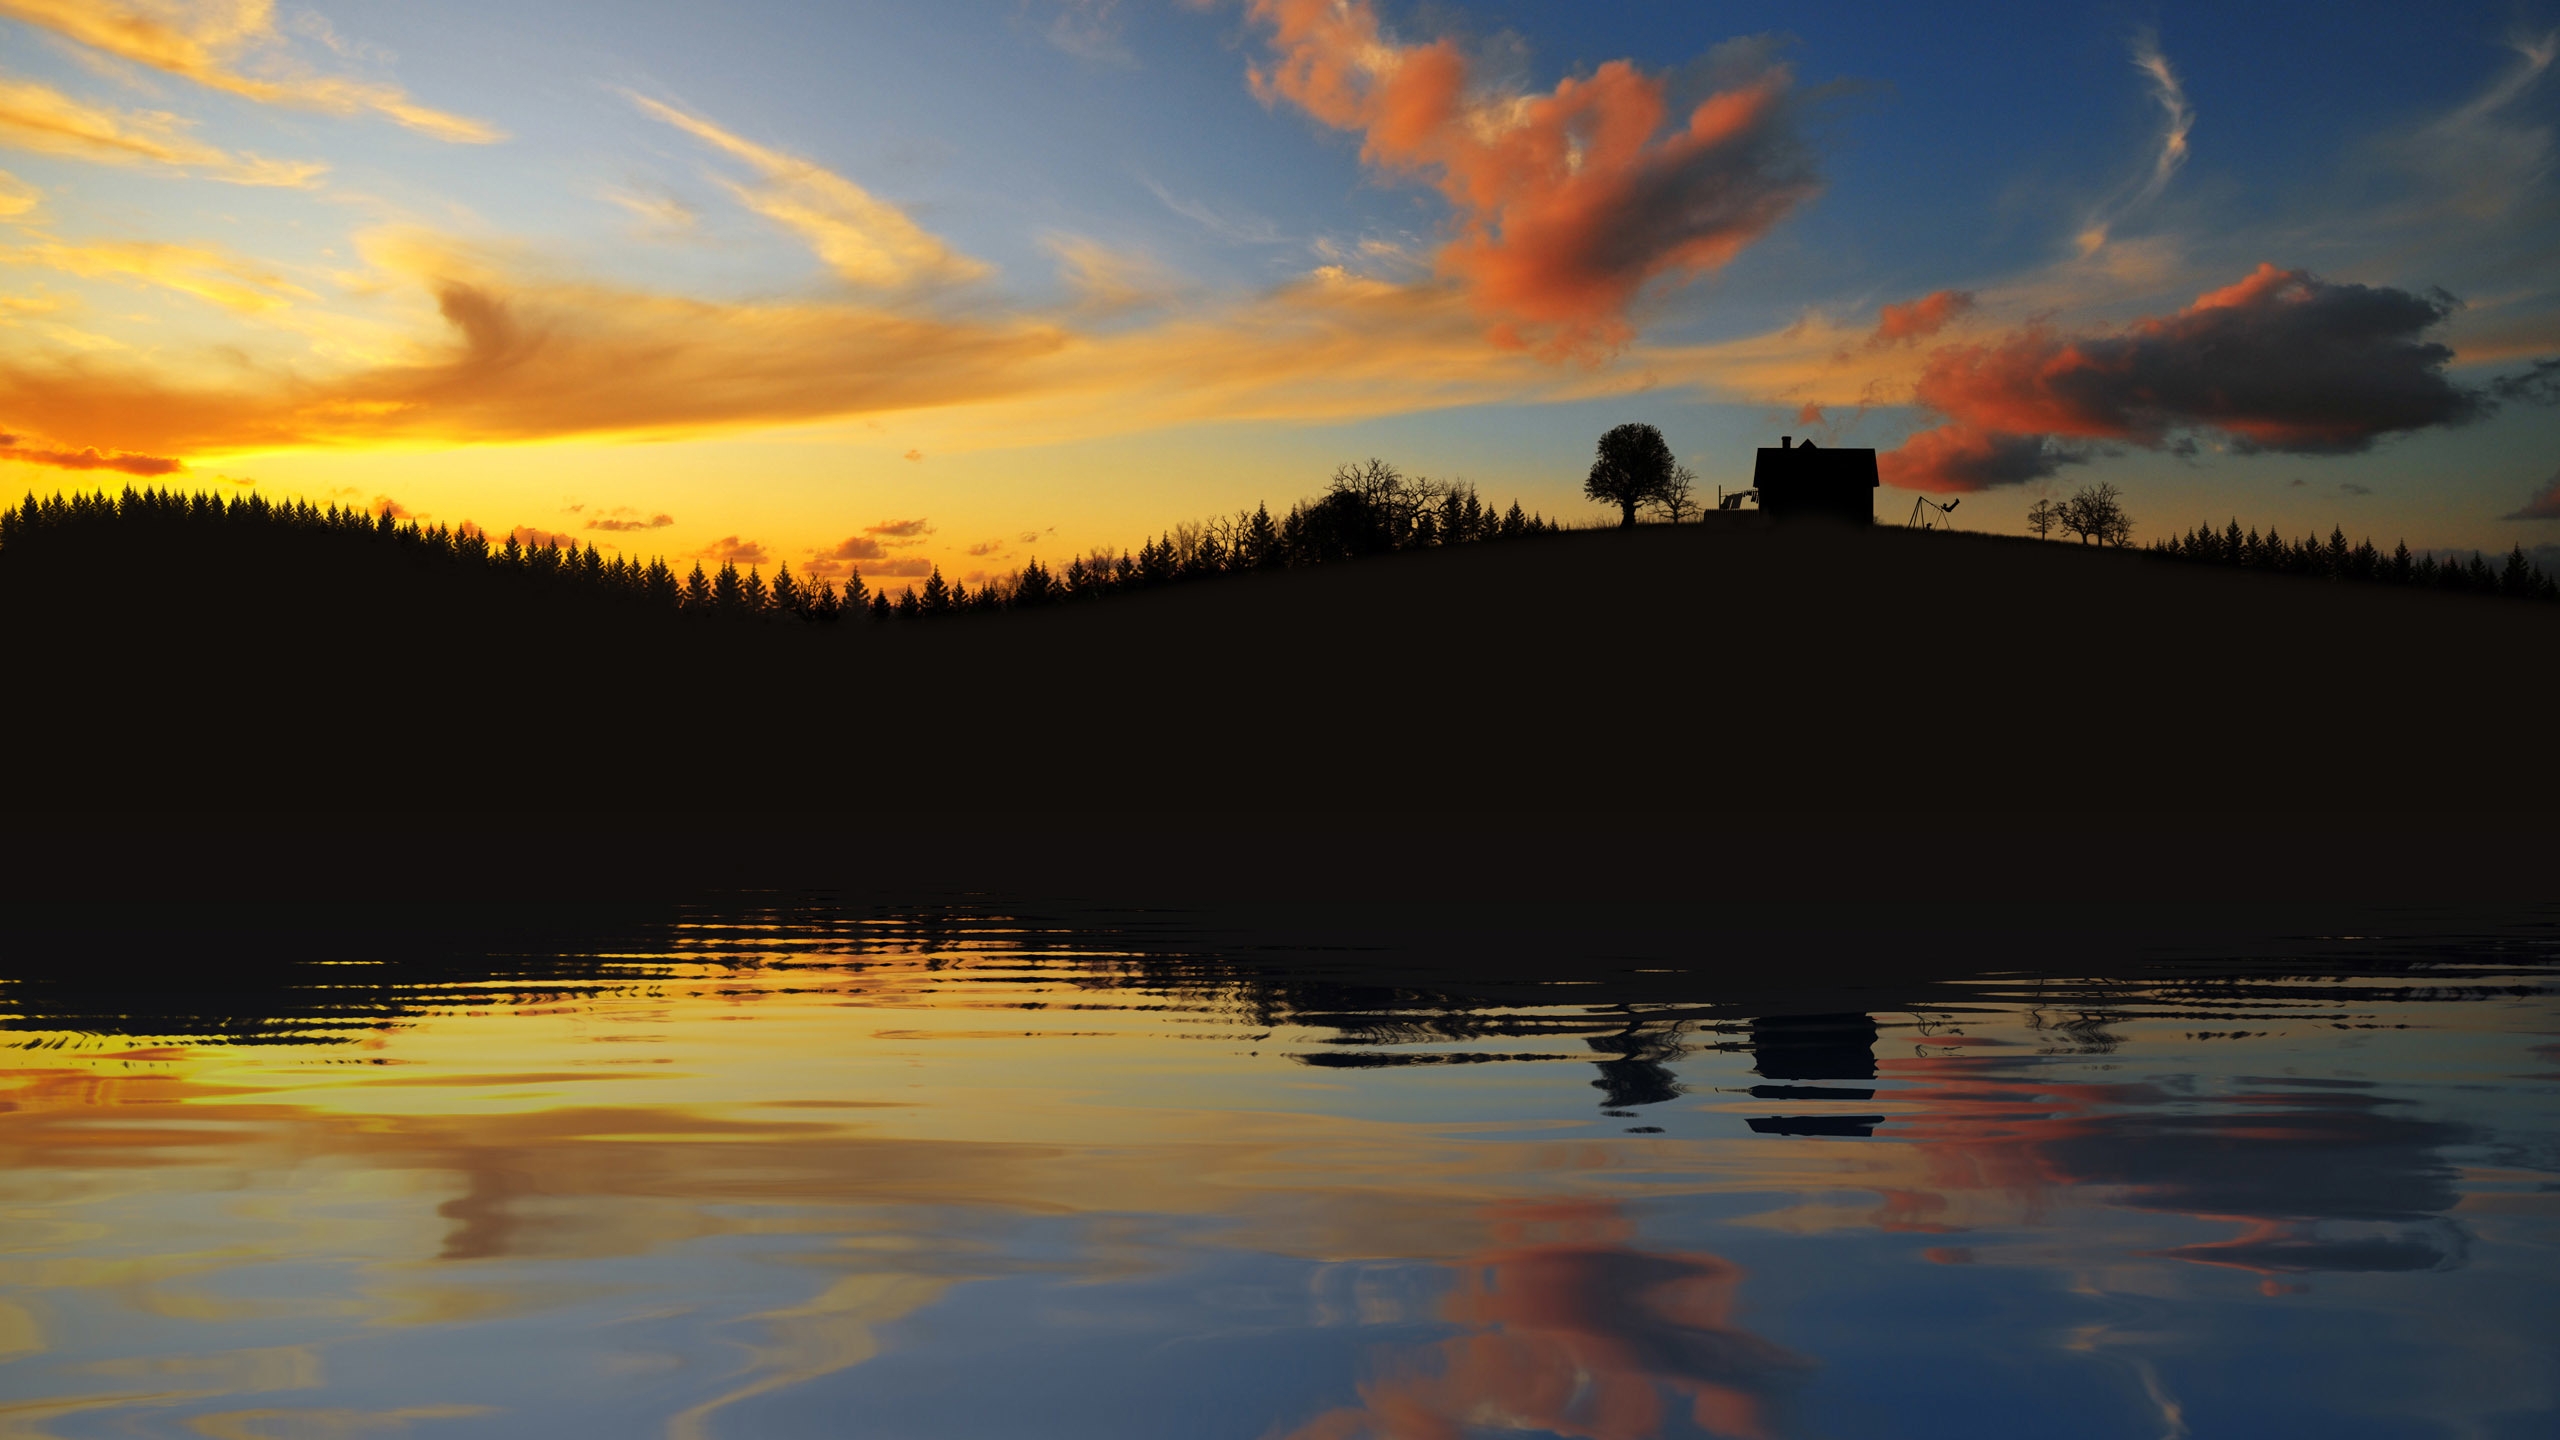 Image: Evening, sunset, landscape, house, hill, water, lake, river, trees, clouds, sky